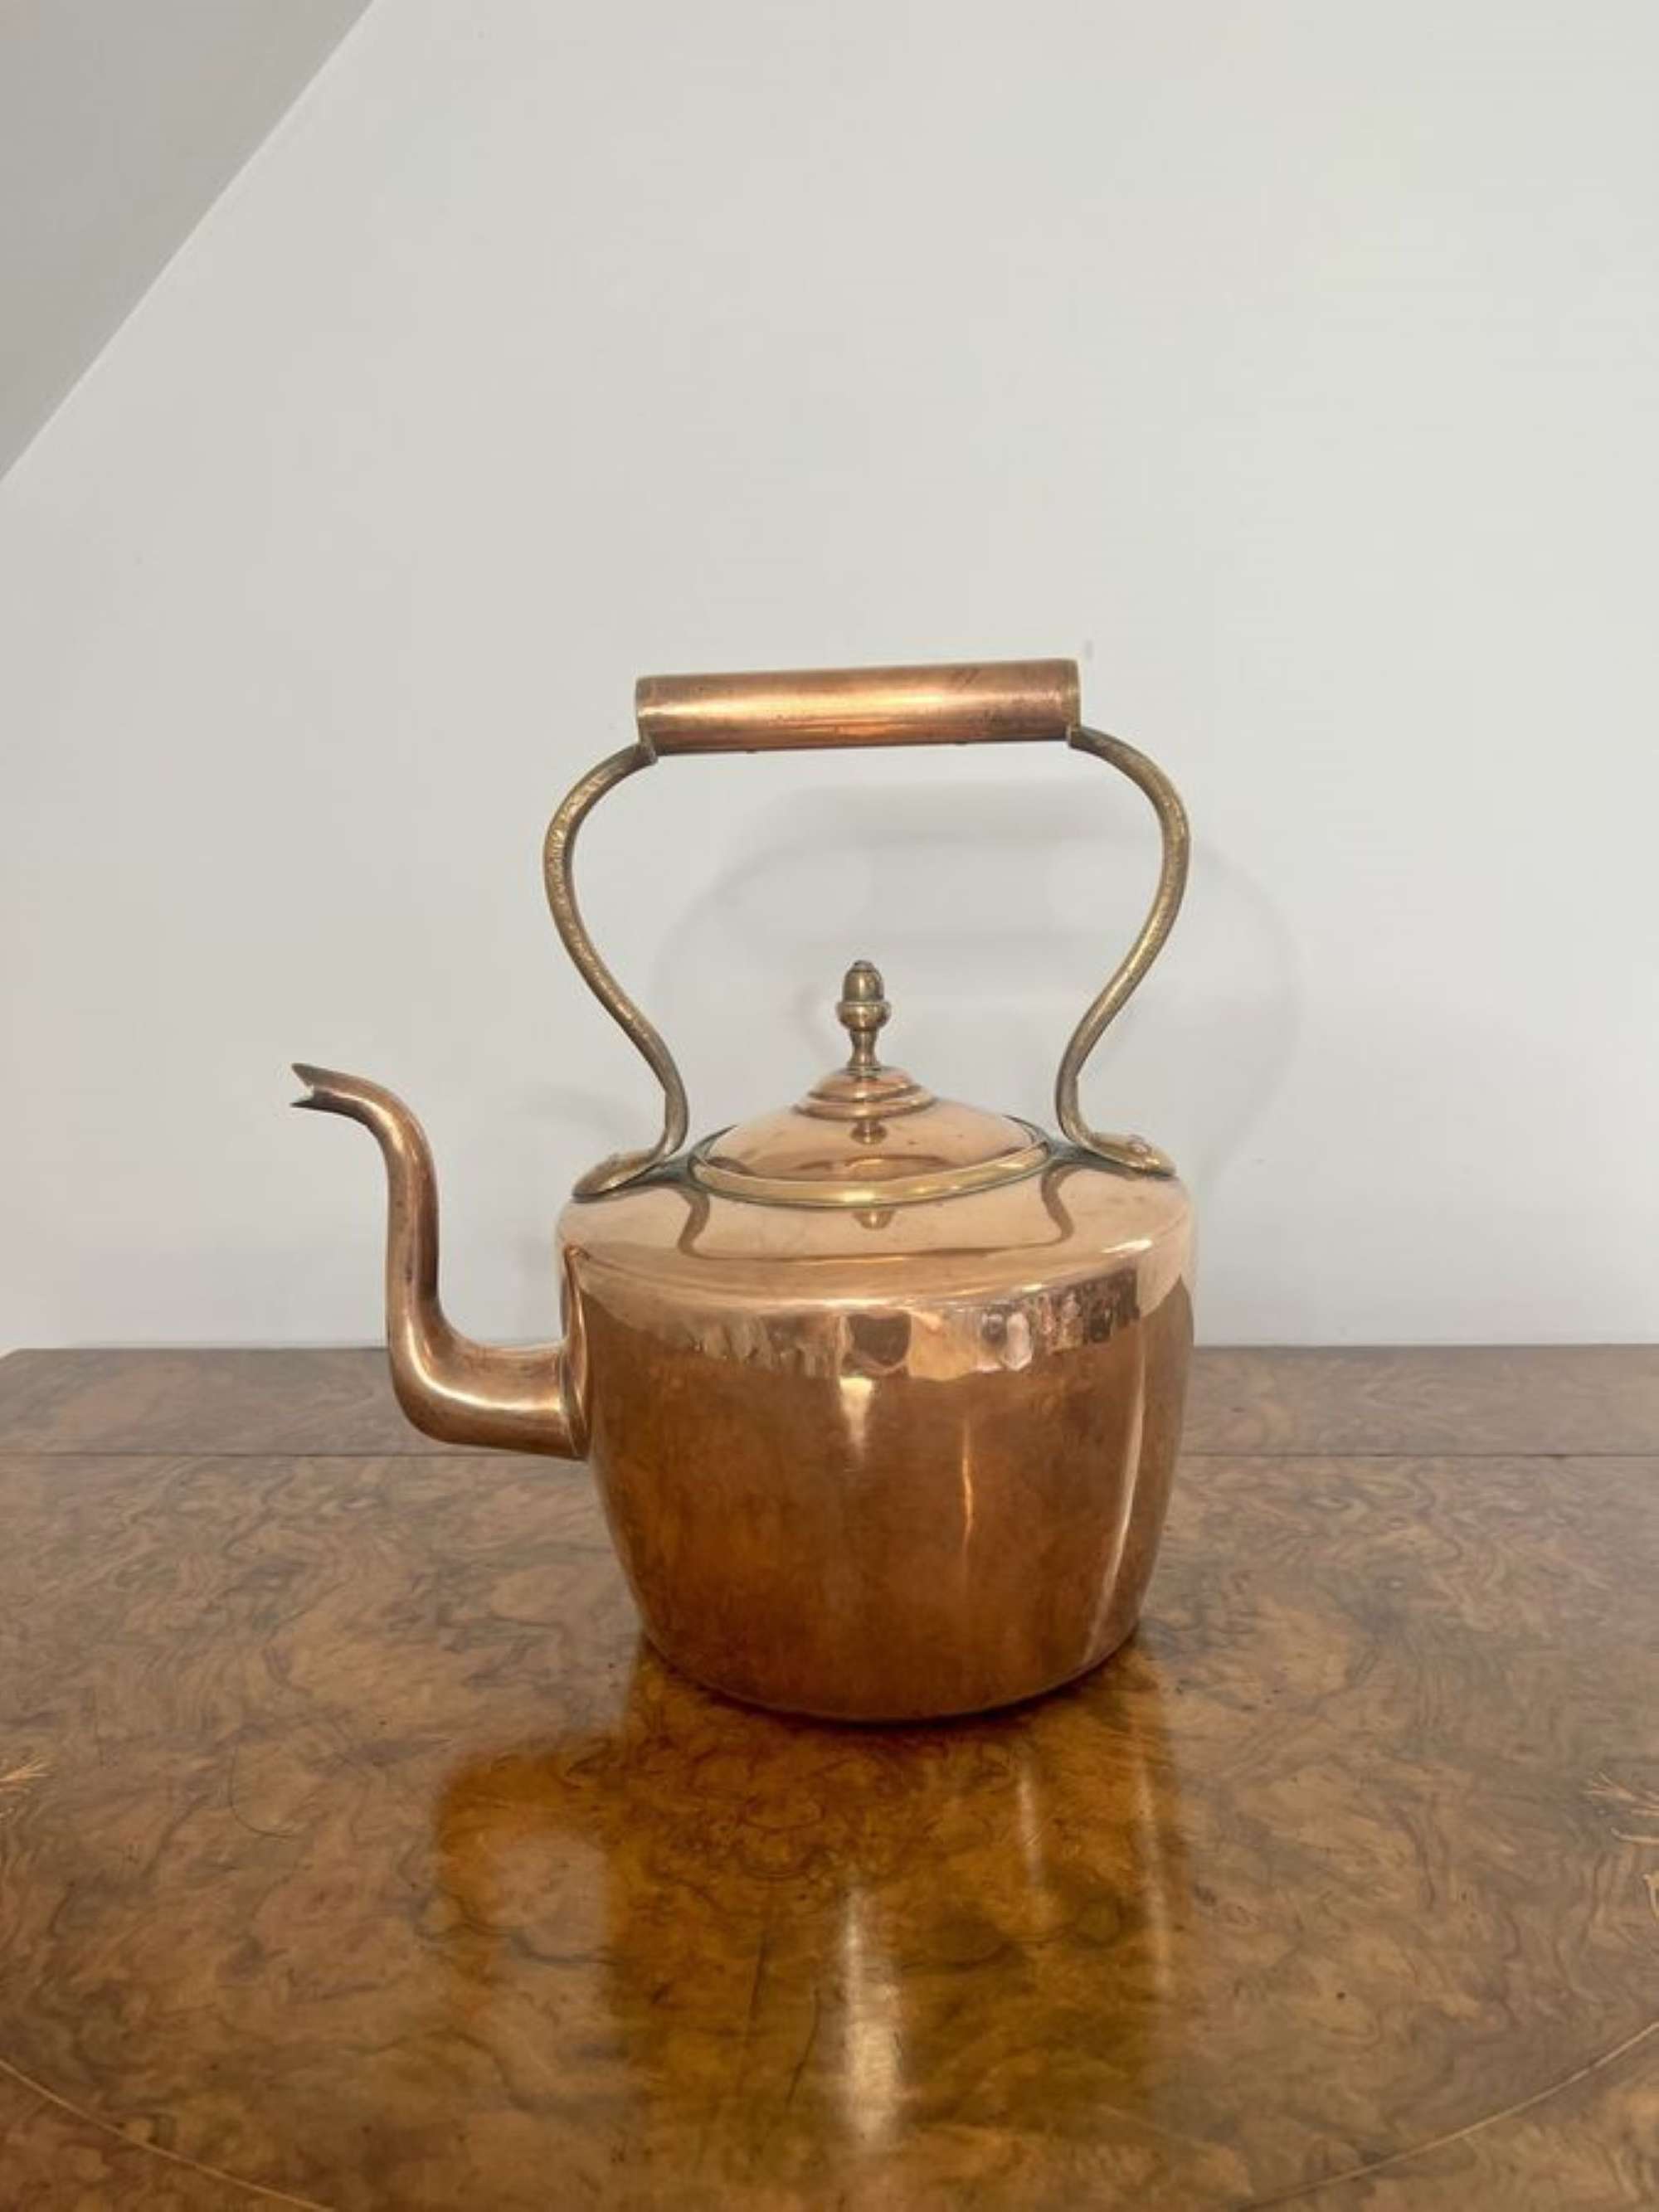 Quality antique George III copper kettle